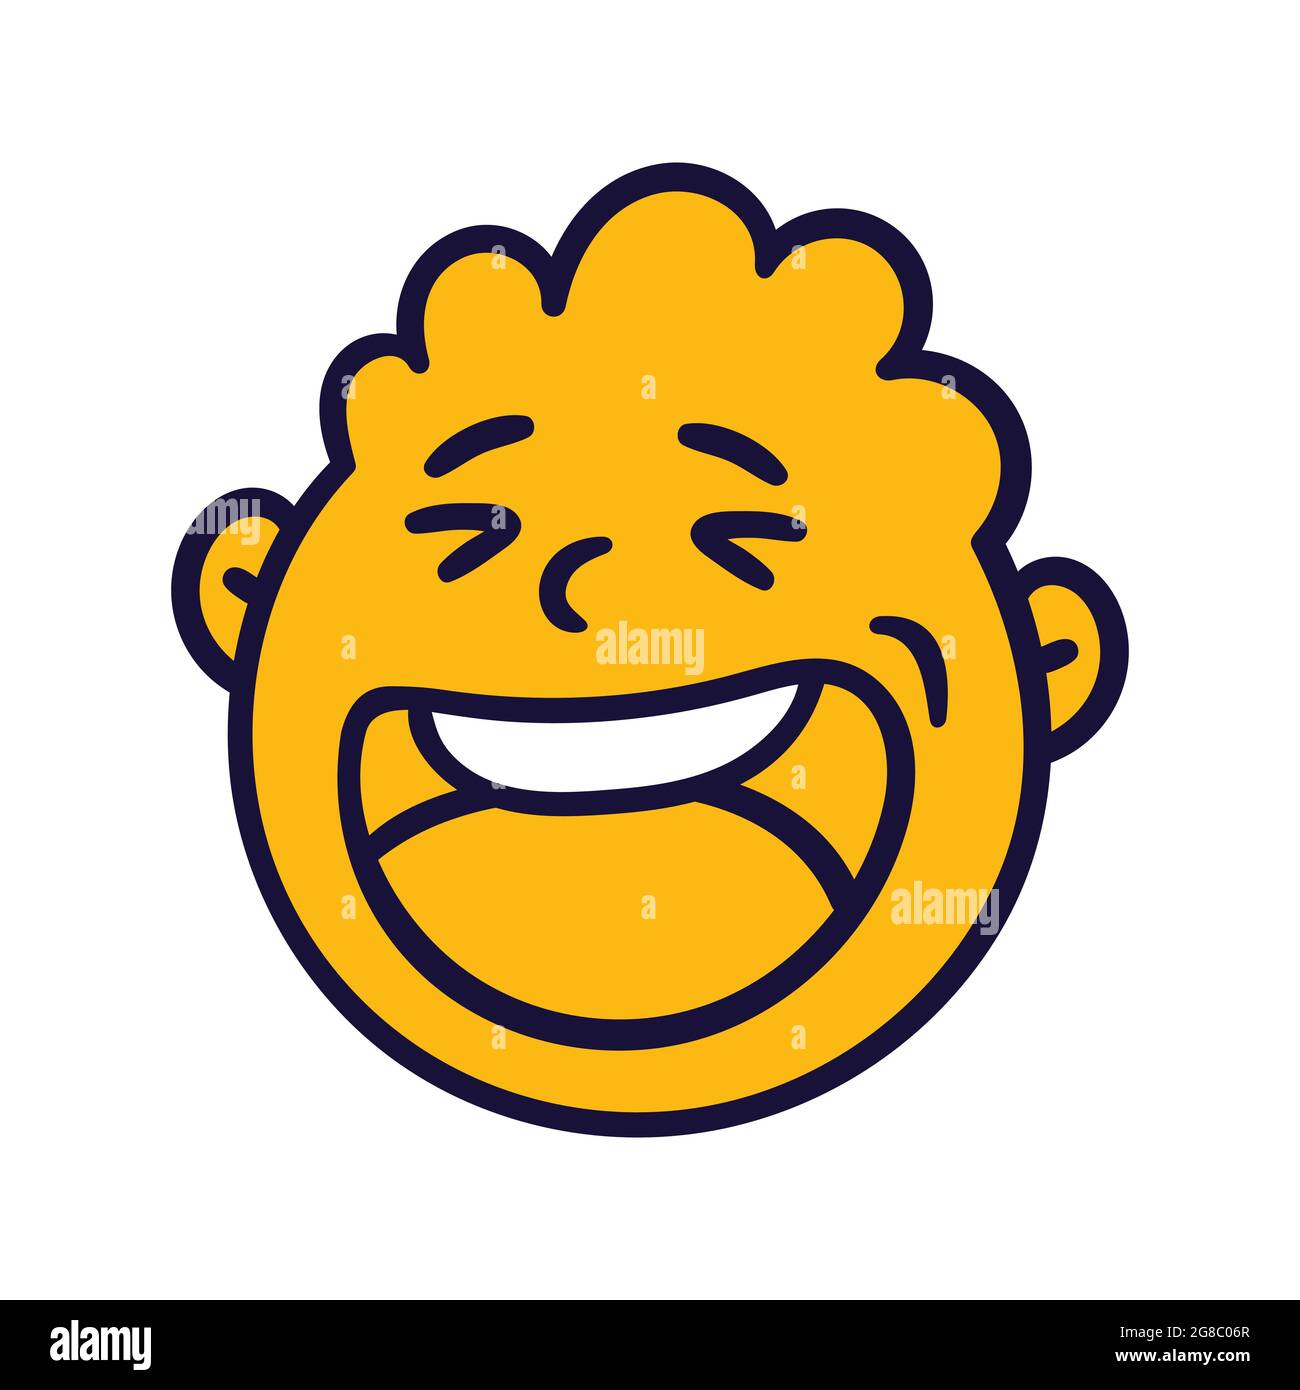 Round abstract face with happy emotion. Happy smiling emoji avatar. Portrait of a jubilant man. Cartoon style. Flat design vector illustration. Stock Vector